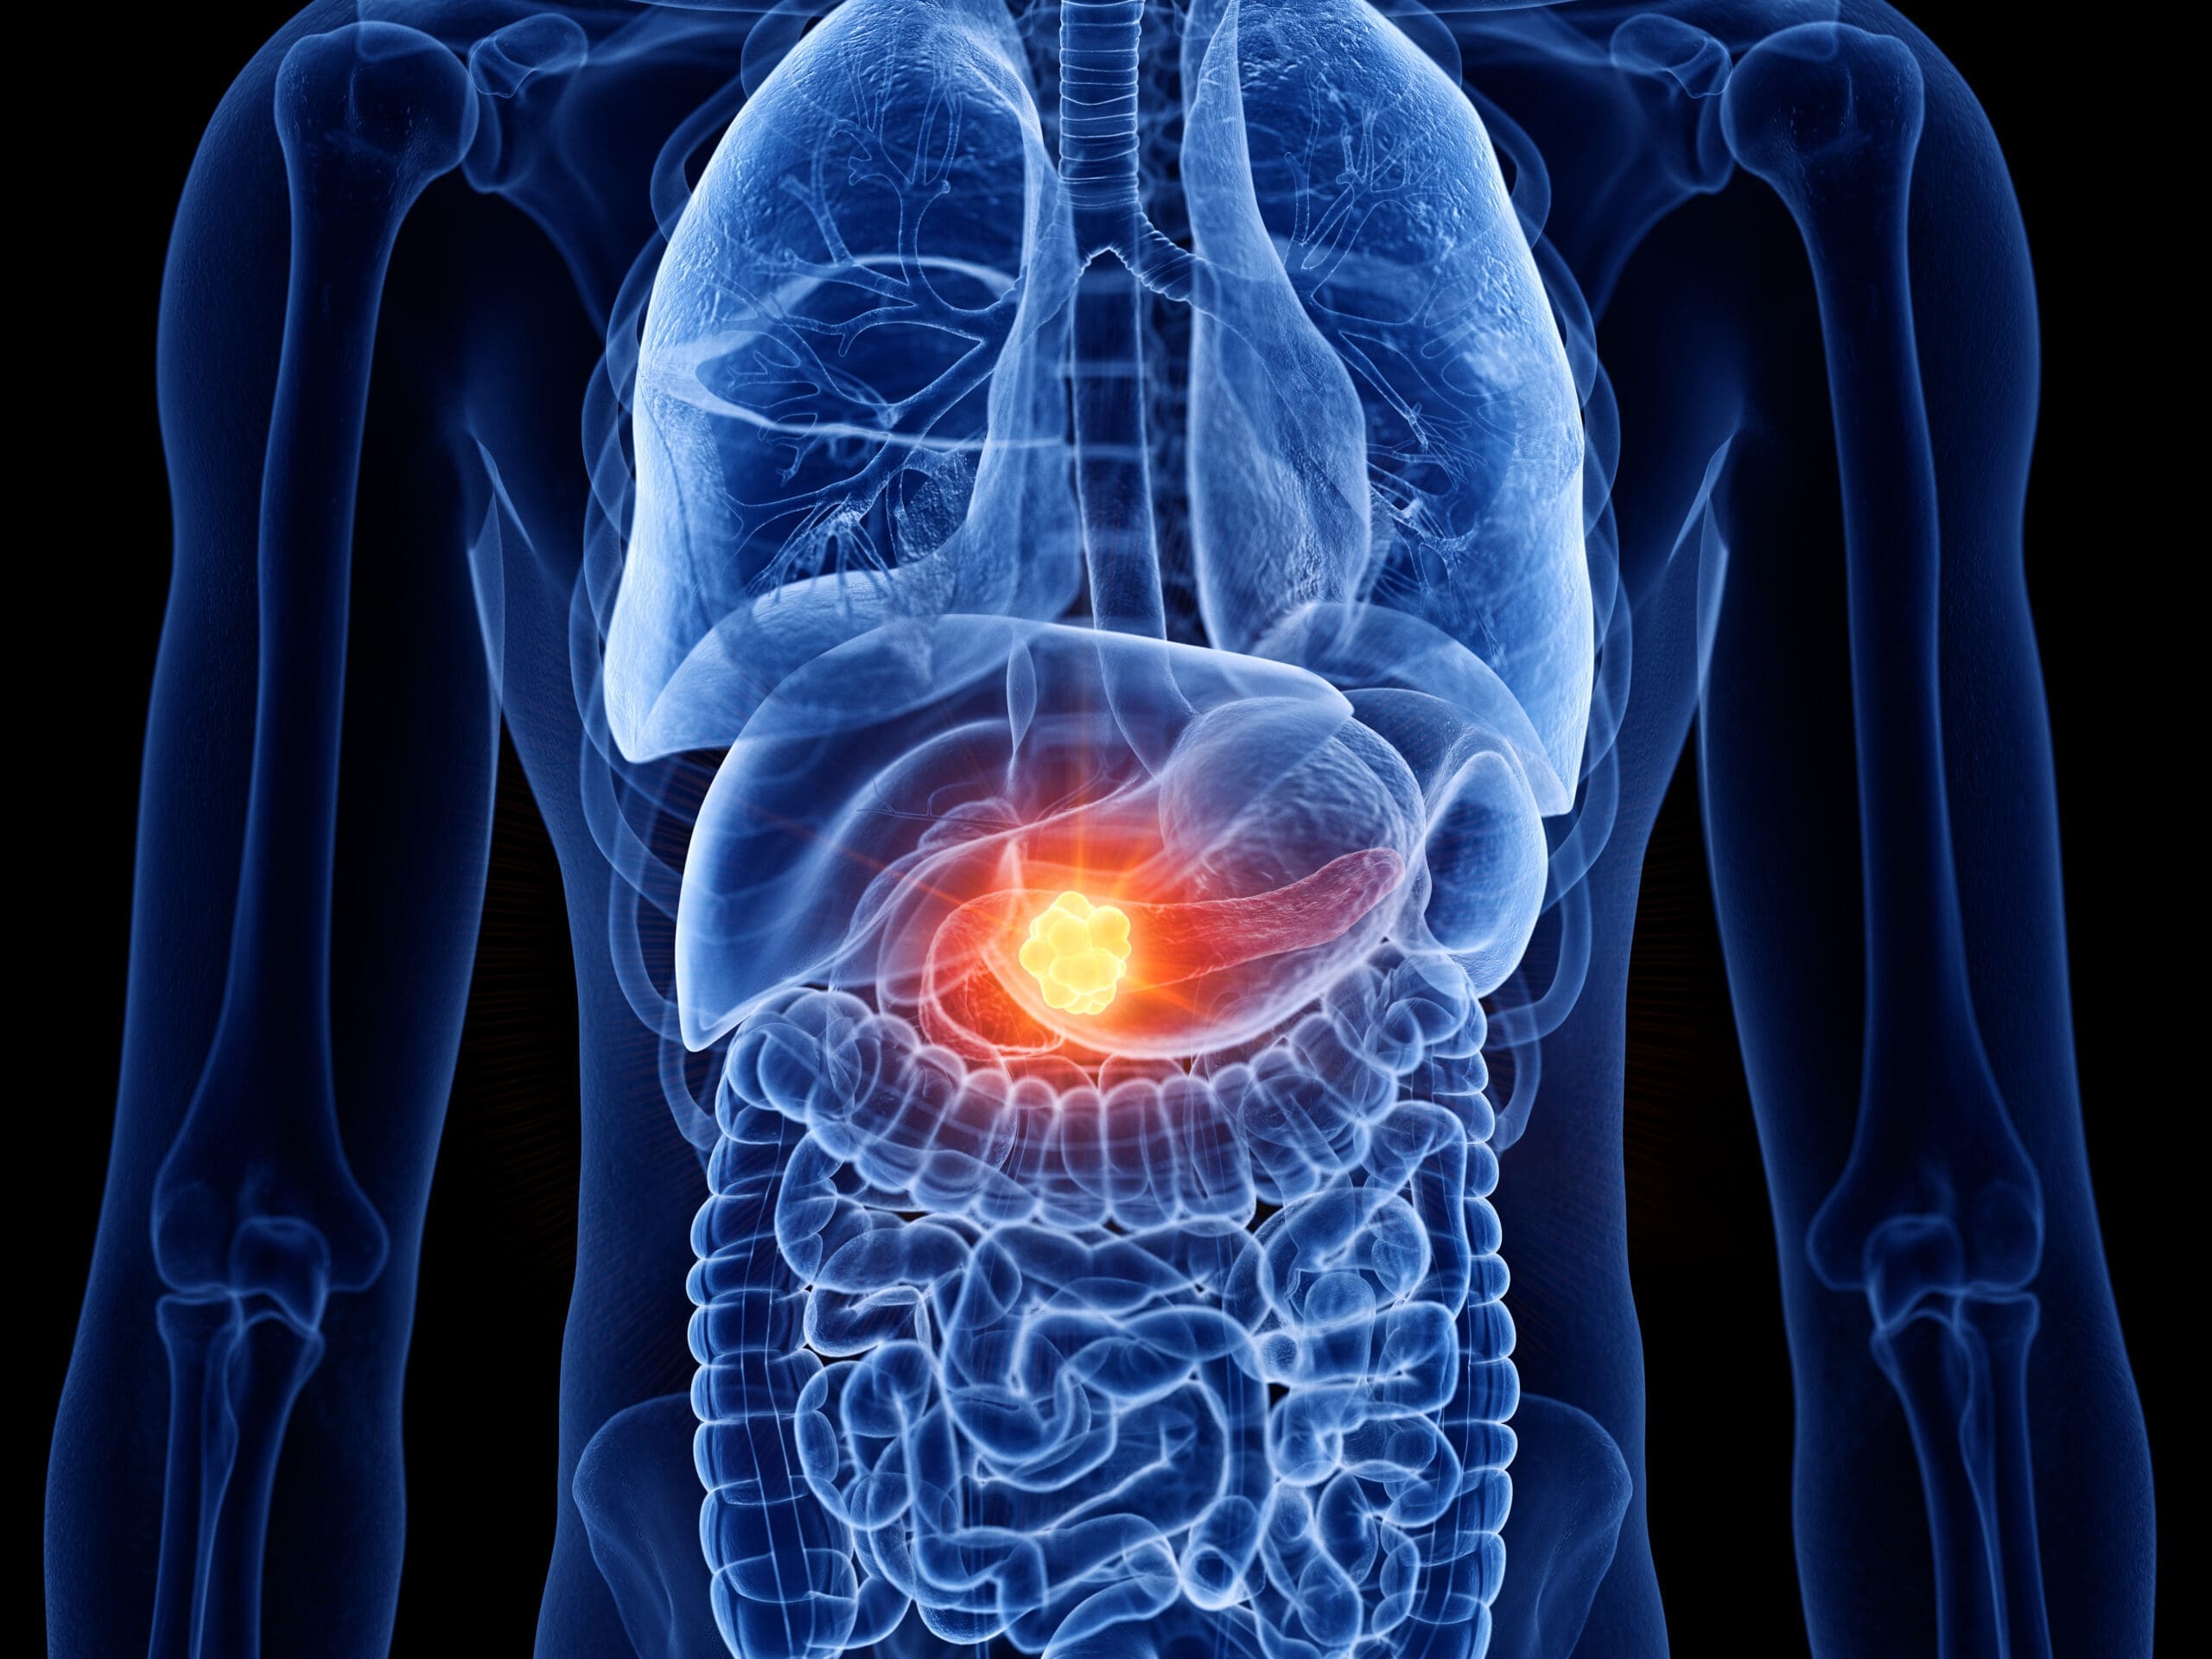 Quality care for pancreatic cancer